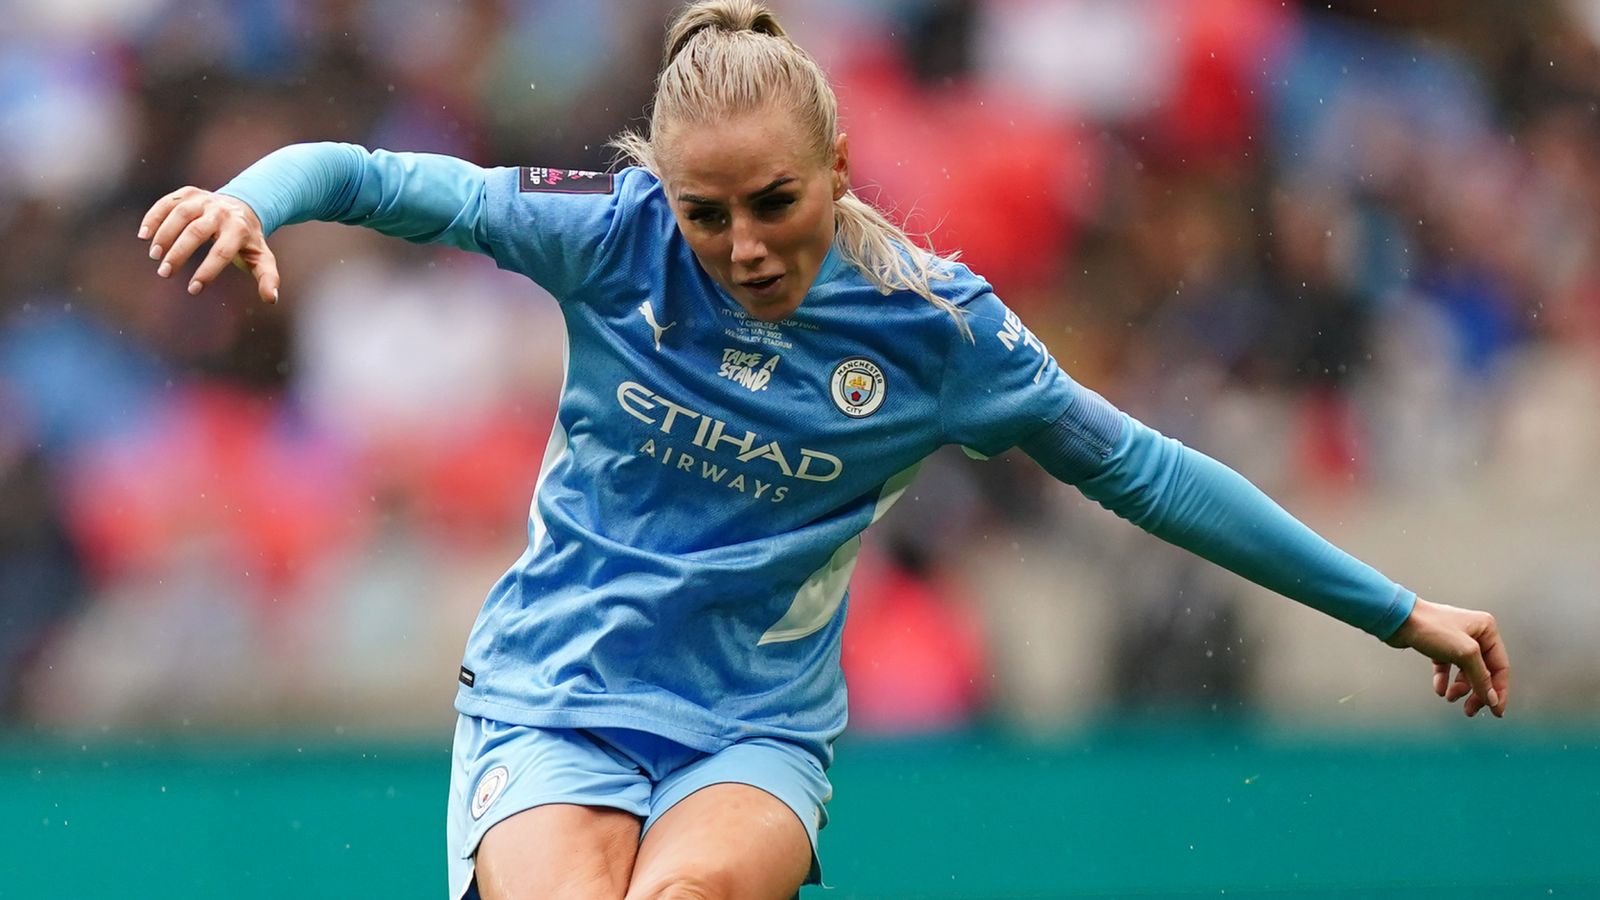 Alex Greenwood: England and Manchester City Women defender signs new contract